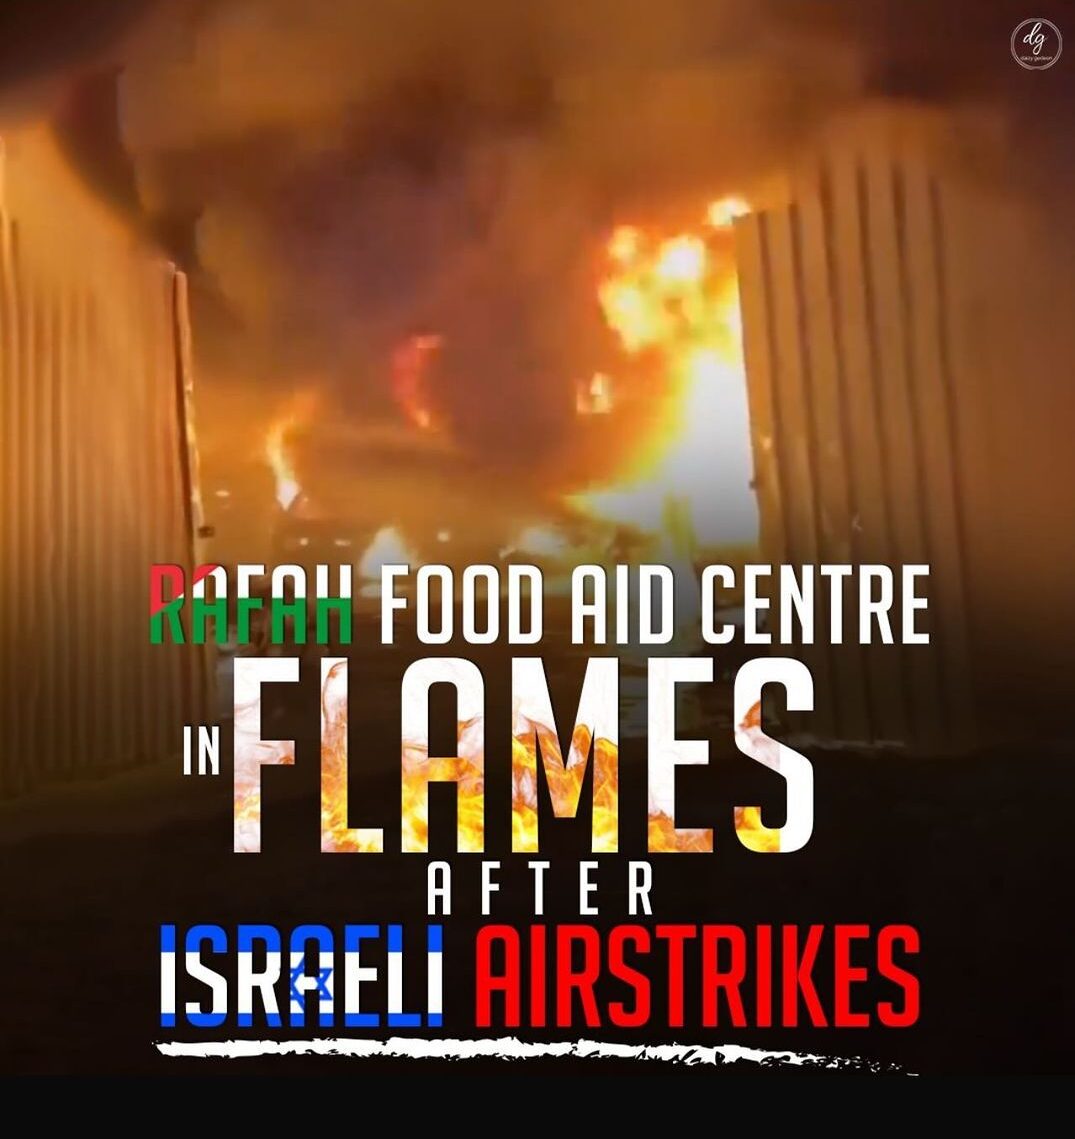 RAFAH-FOOD-AID-CENTRE-IN-FLAMES-AFTER-ISRAELI-AIRSTRIKES-e1714469805513